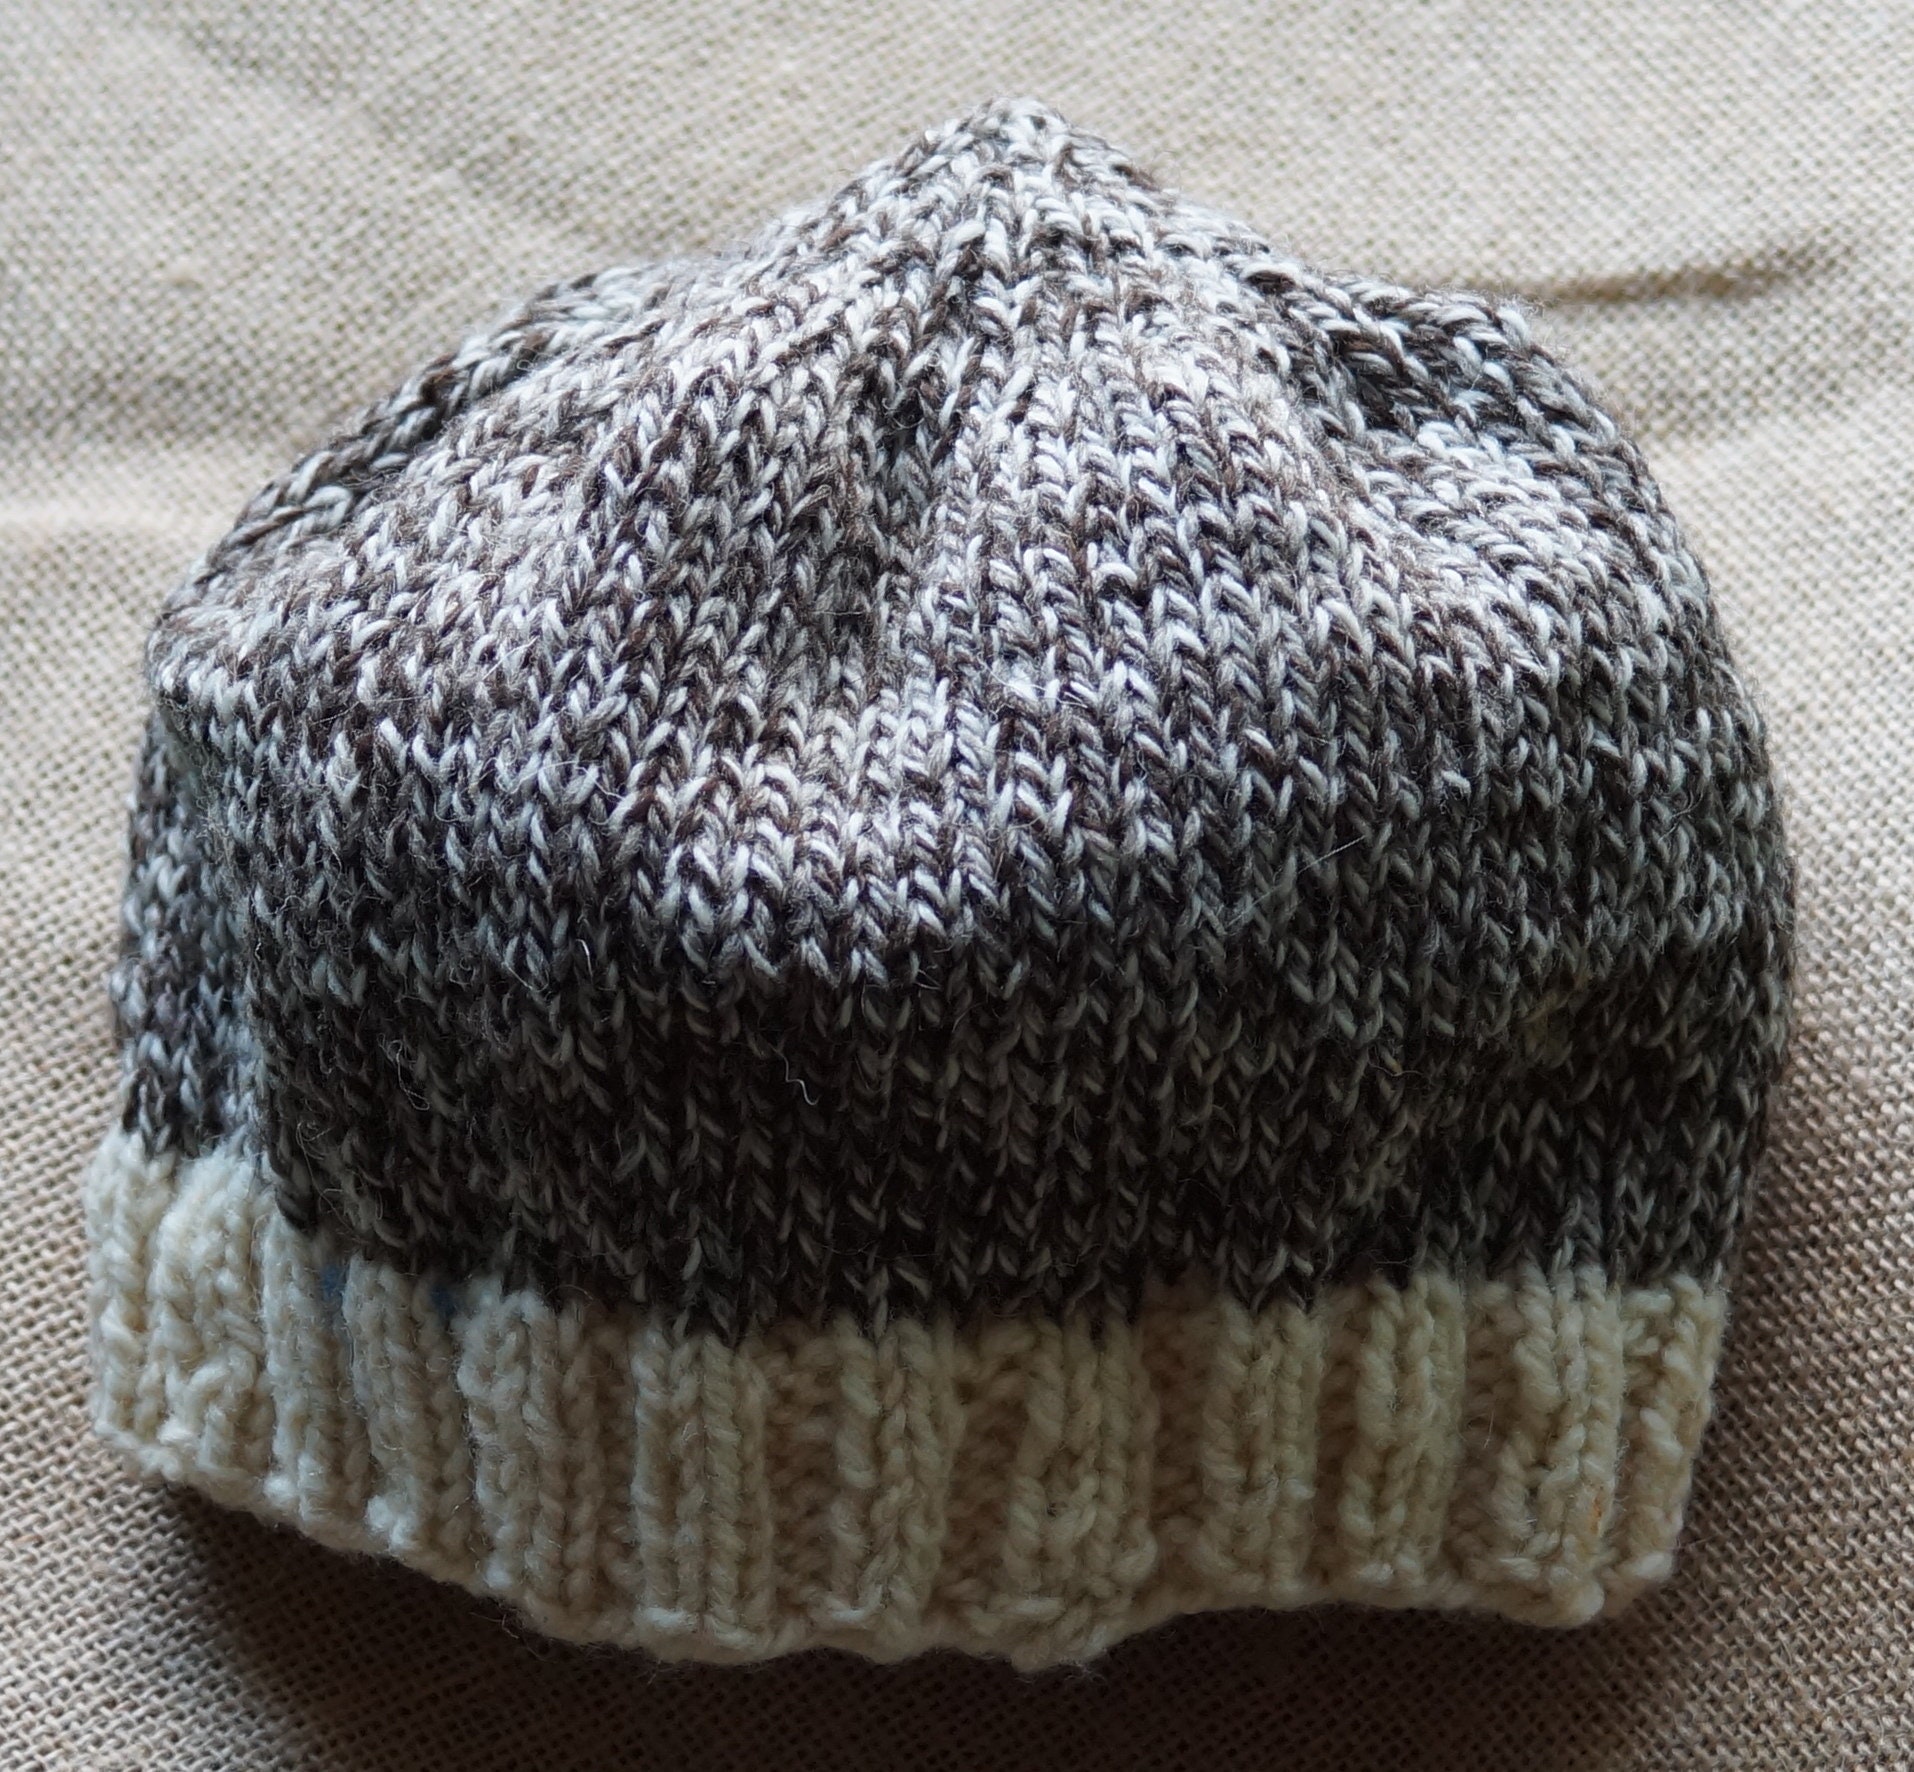 Ragg wool hat hand knit undyed merino wool farm yarn very soft from our ...